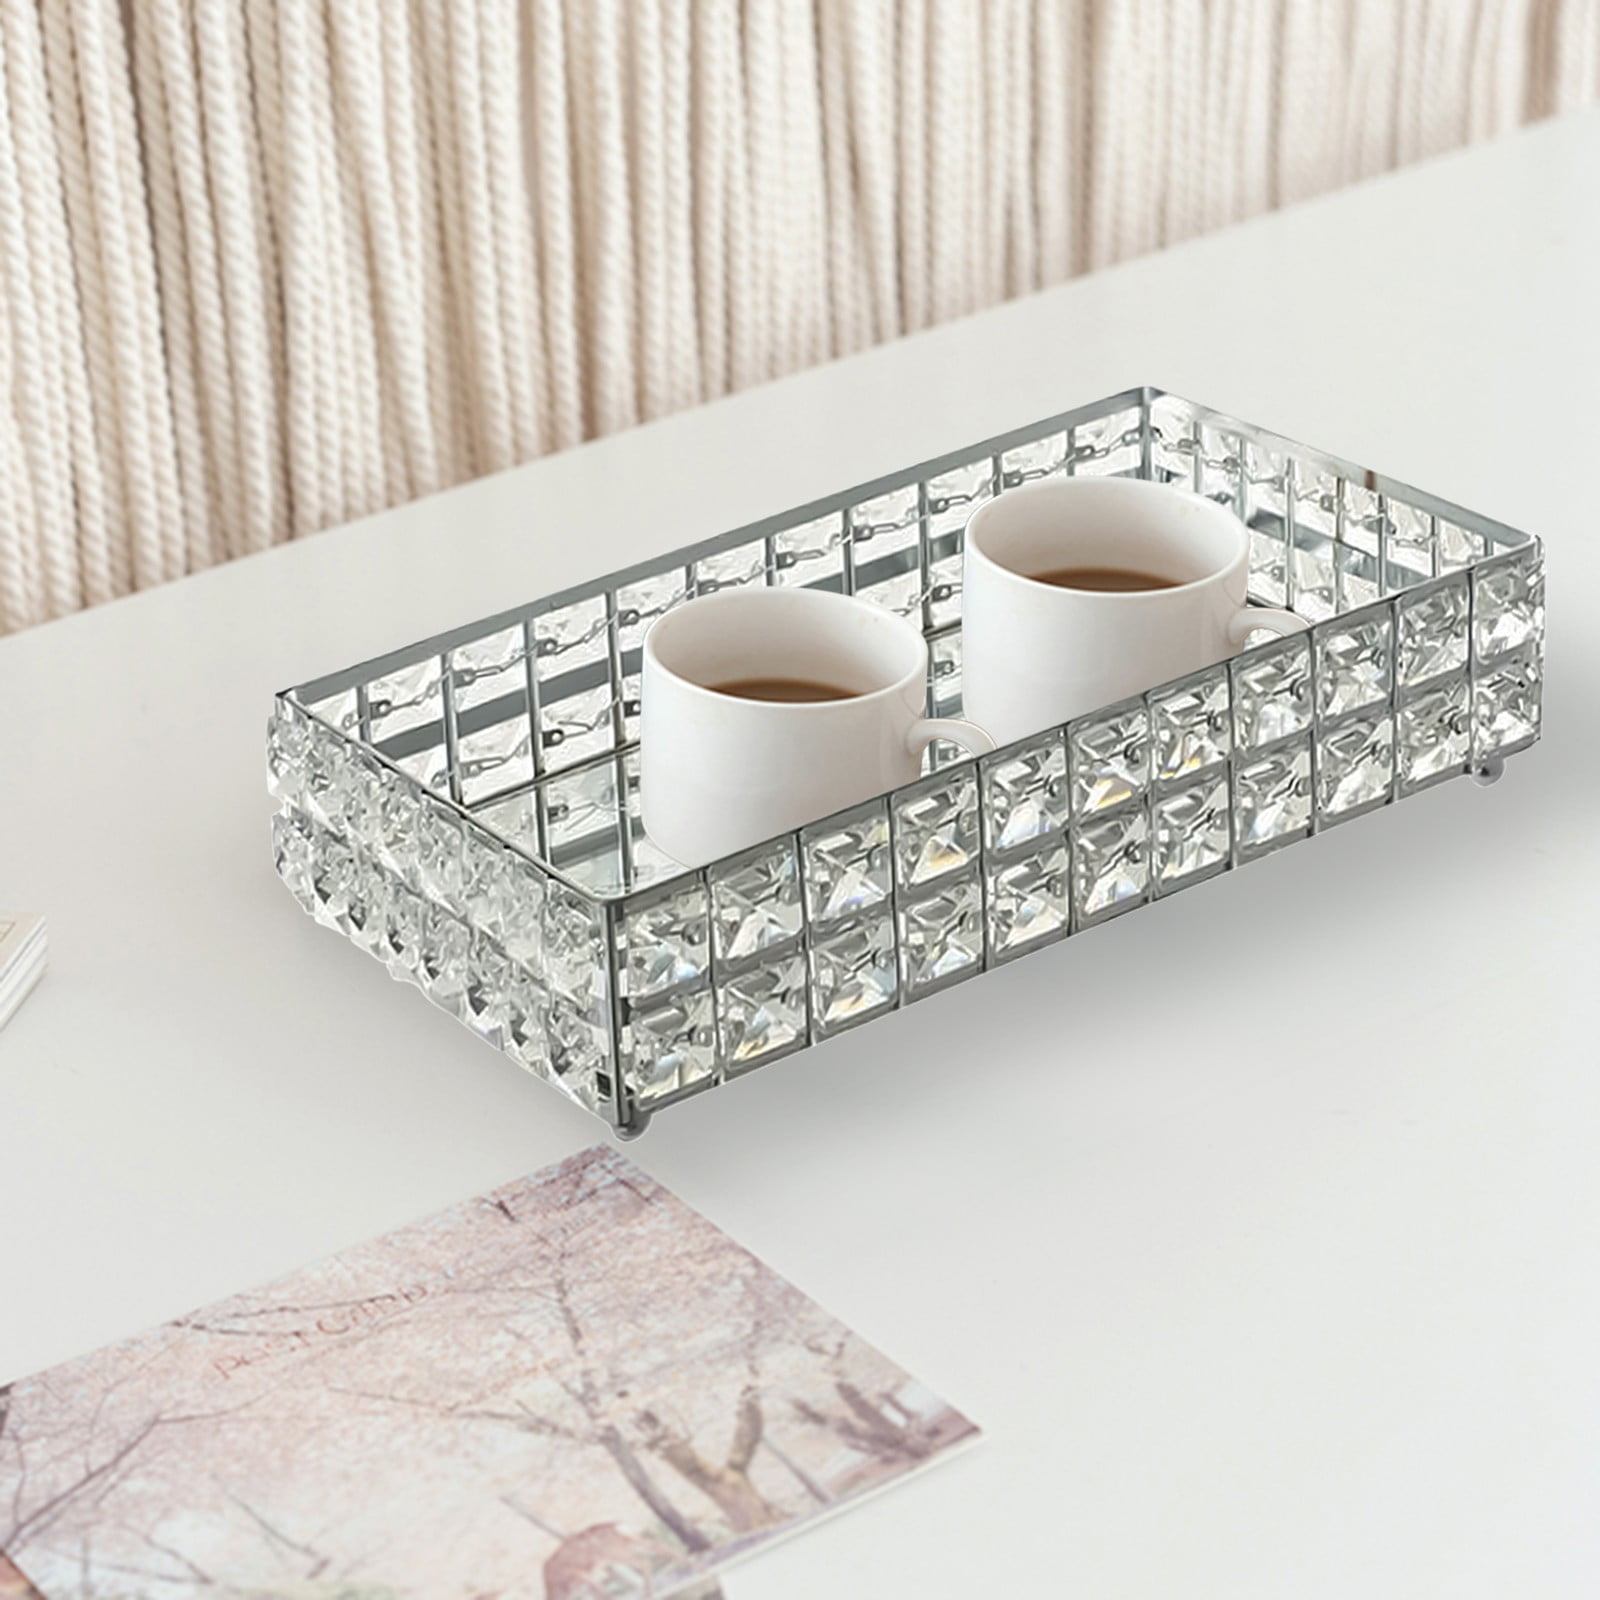 GiliGiliso School Supplies Crystal Vanity Makeup Tray Sparkly Bling Jewelry  Trinket Tray Rectangle Perfume Tray Cosmetic Display Organizer Dresser Tray  Bathroom Tray for Home Decor Fall on Sale 